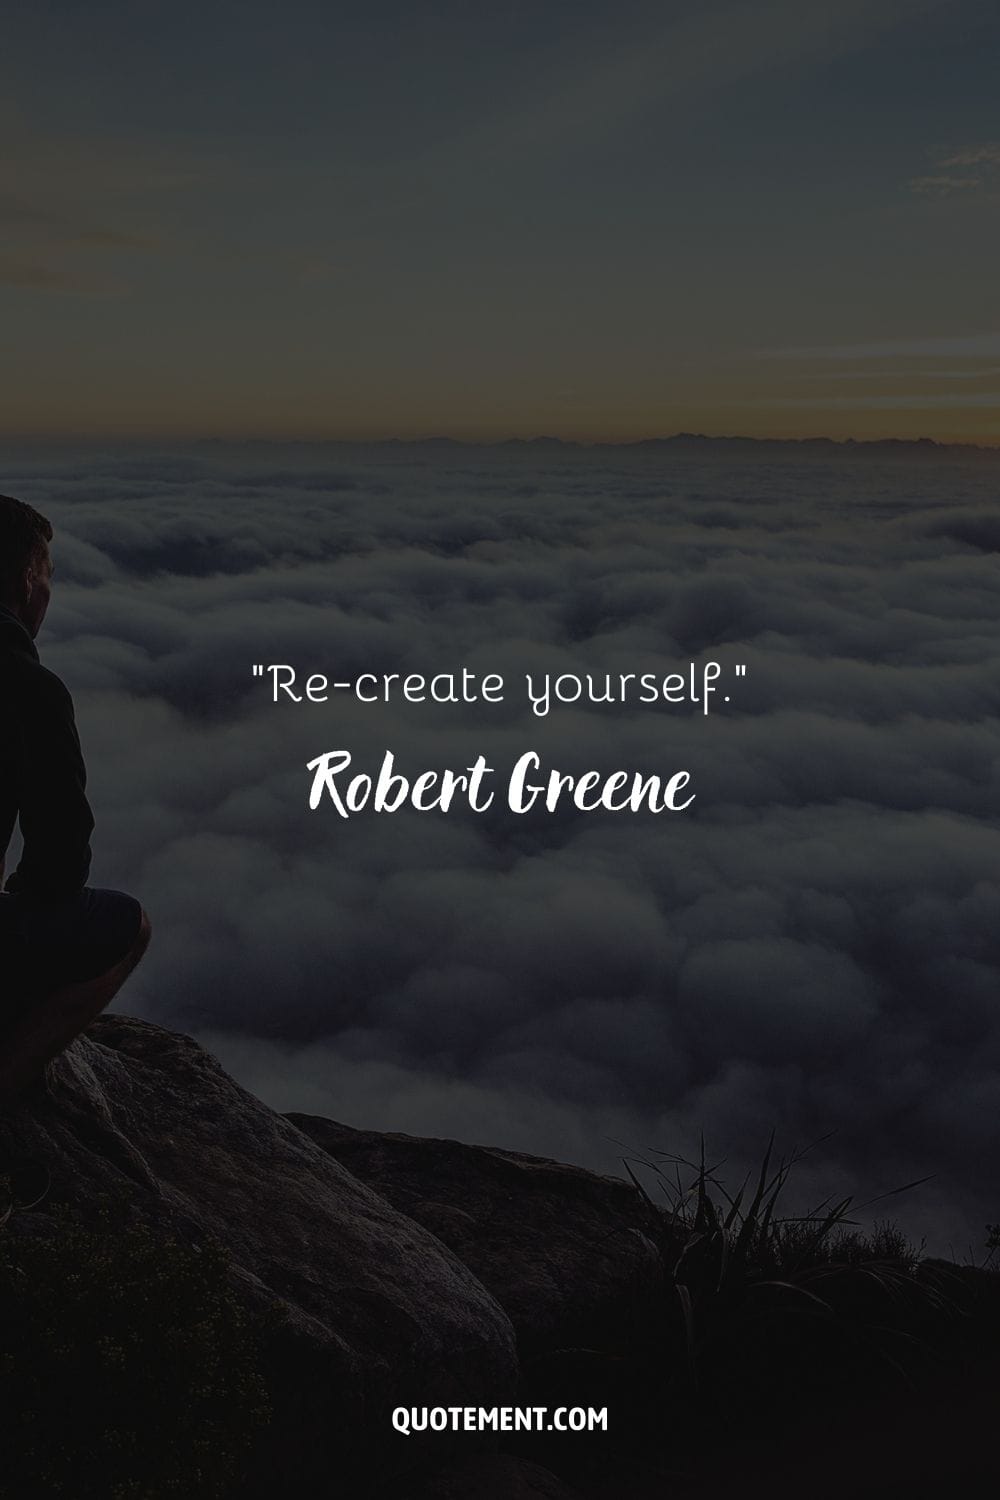 “Re-create yourself.” ― Robert Greene, The 48 Laws of Power